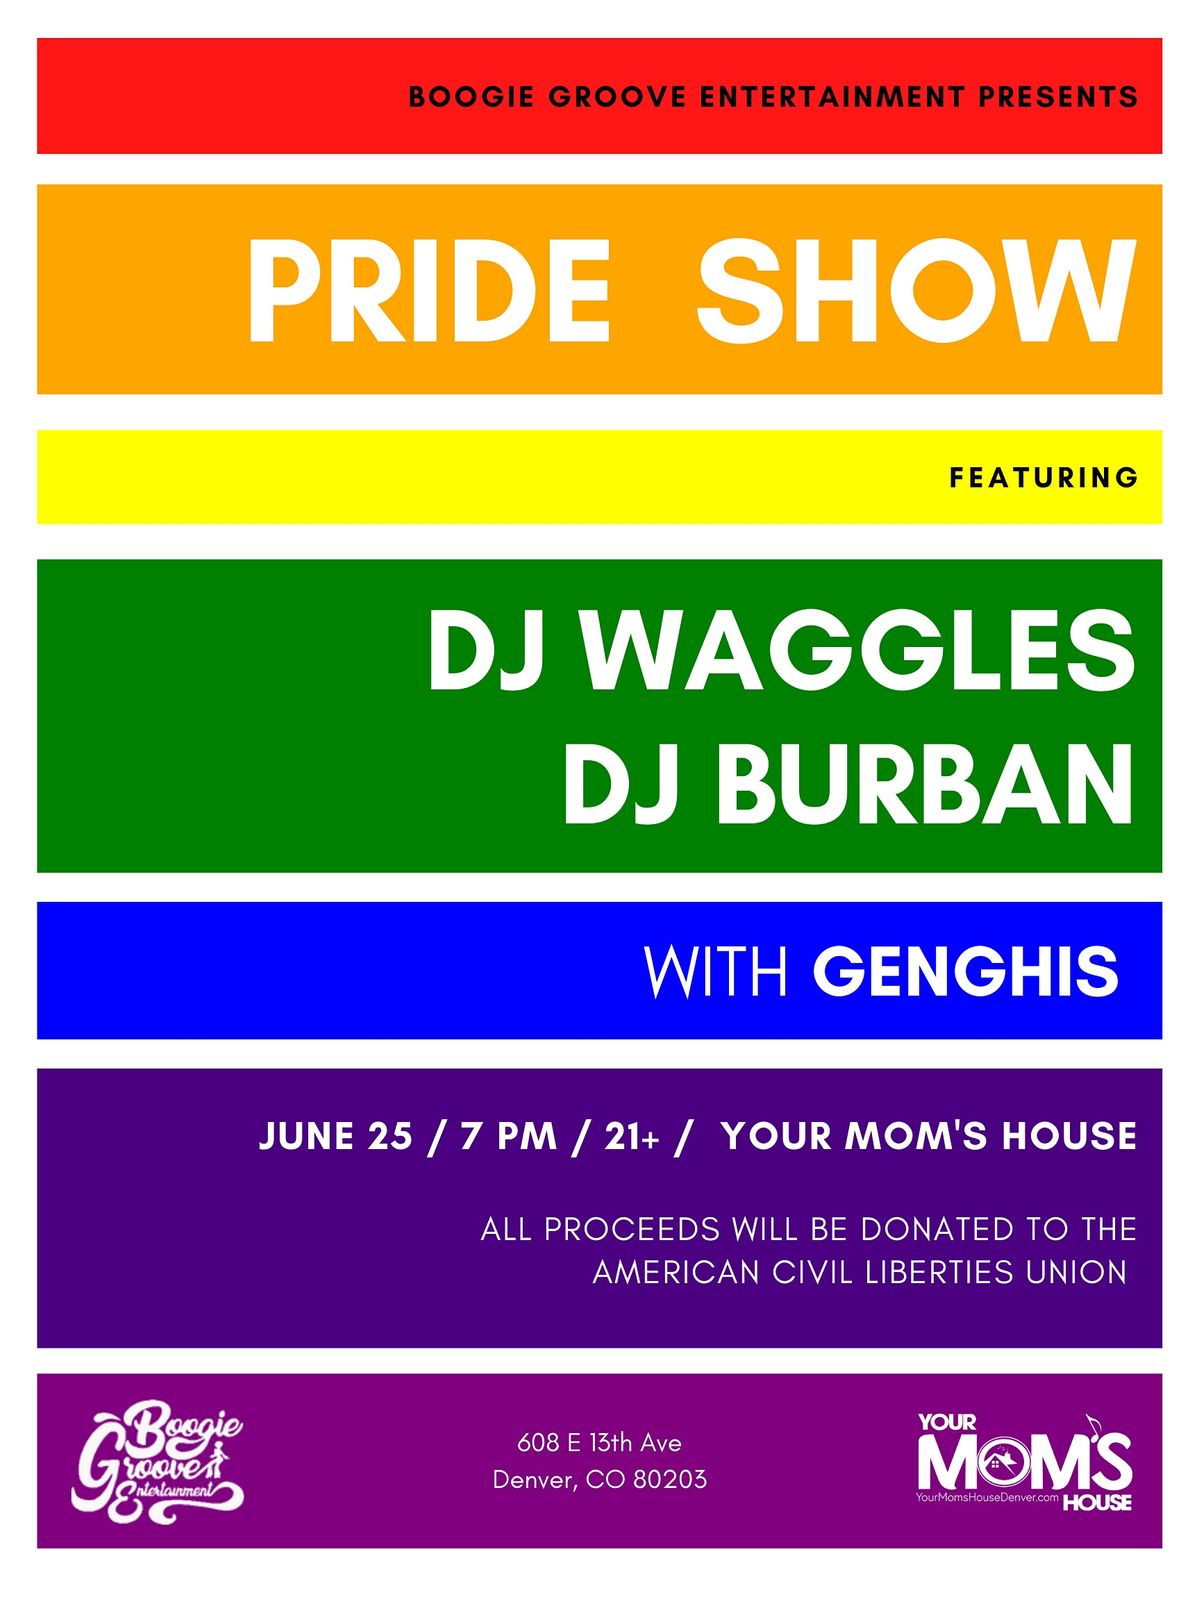 Pride Concert Benefit feat. DJ Waggles X Burban w\/ Genghis